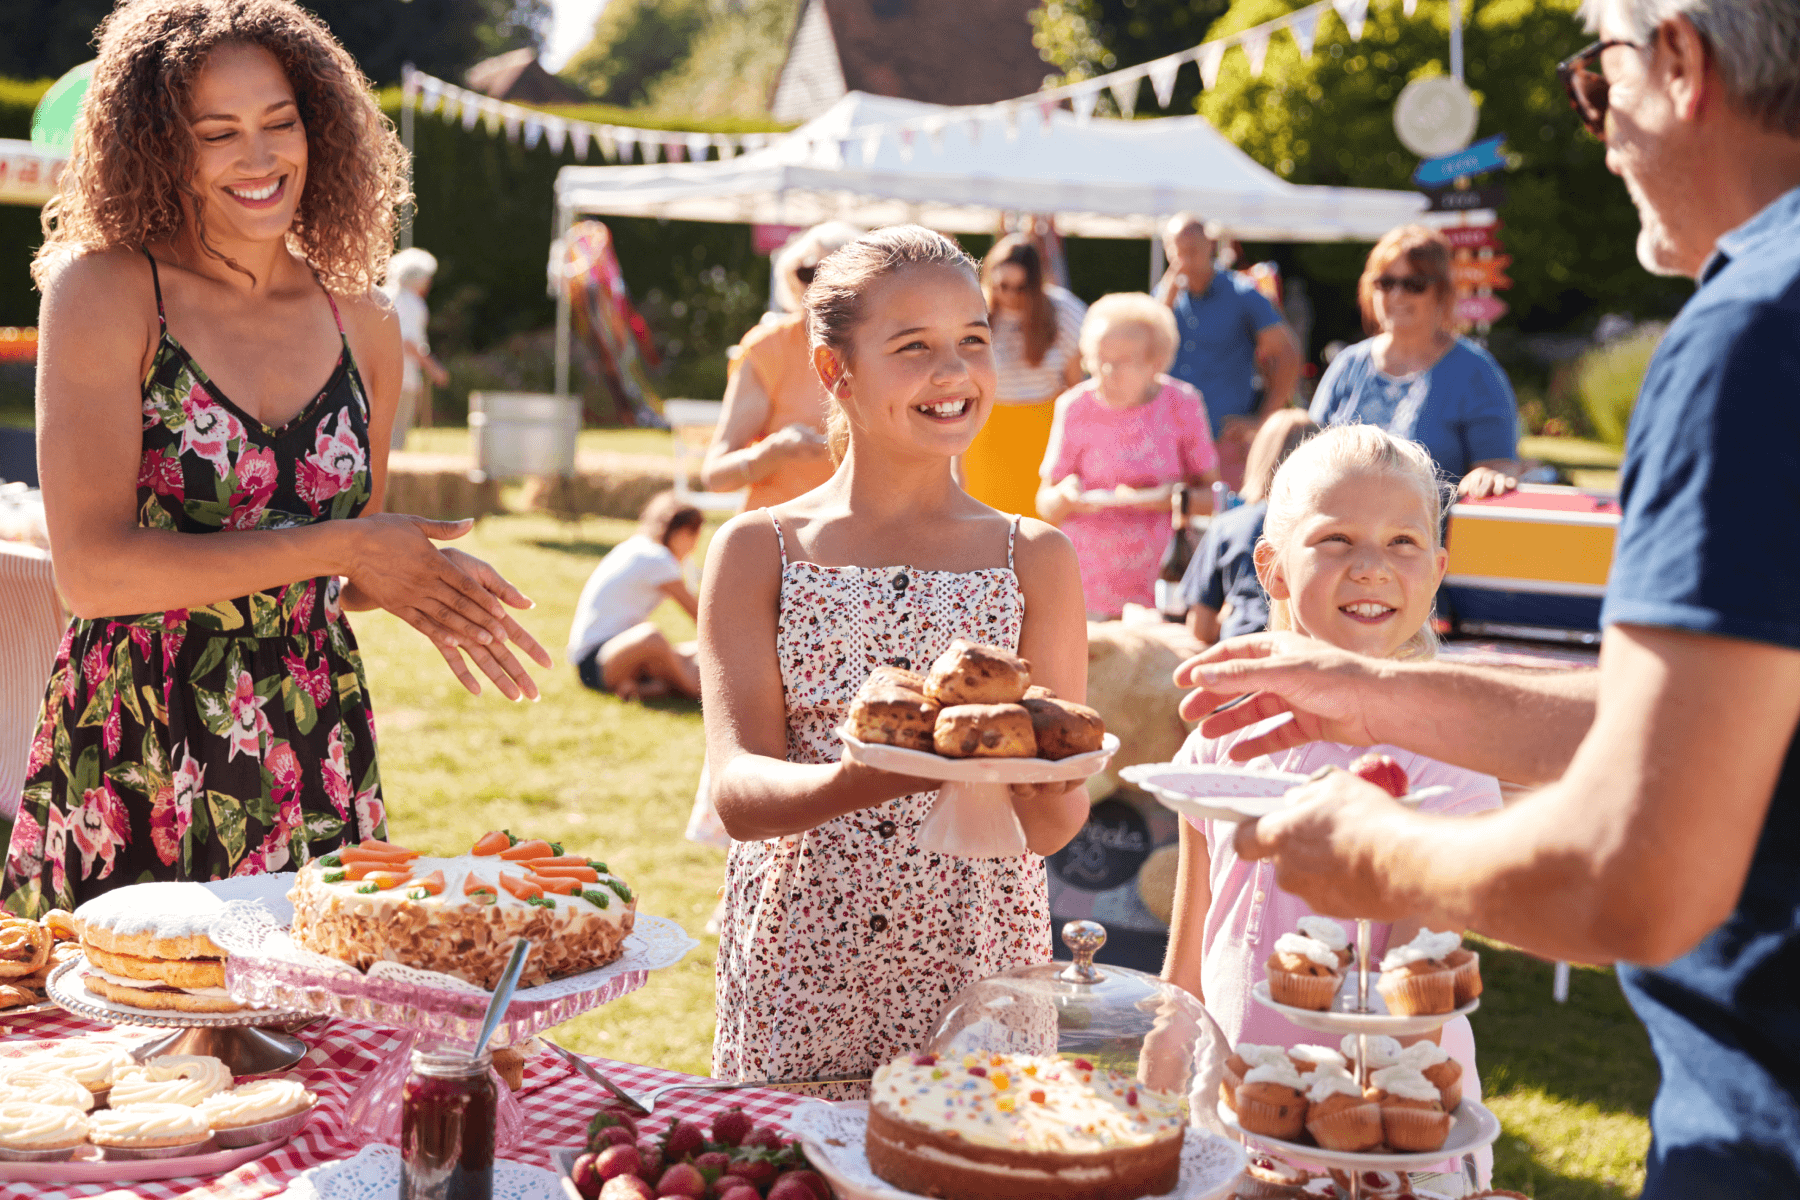 Two young girls at a dessert table in a park hold out baked goods for a man to take while a smiling woman looks on.